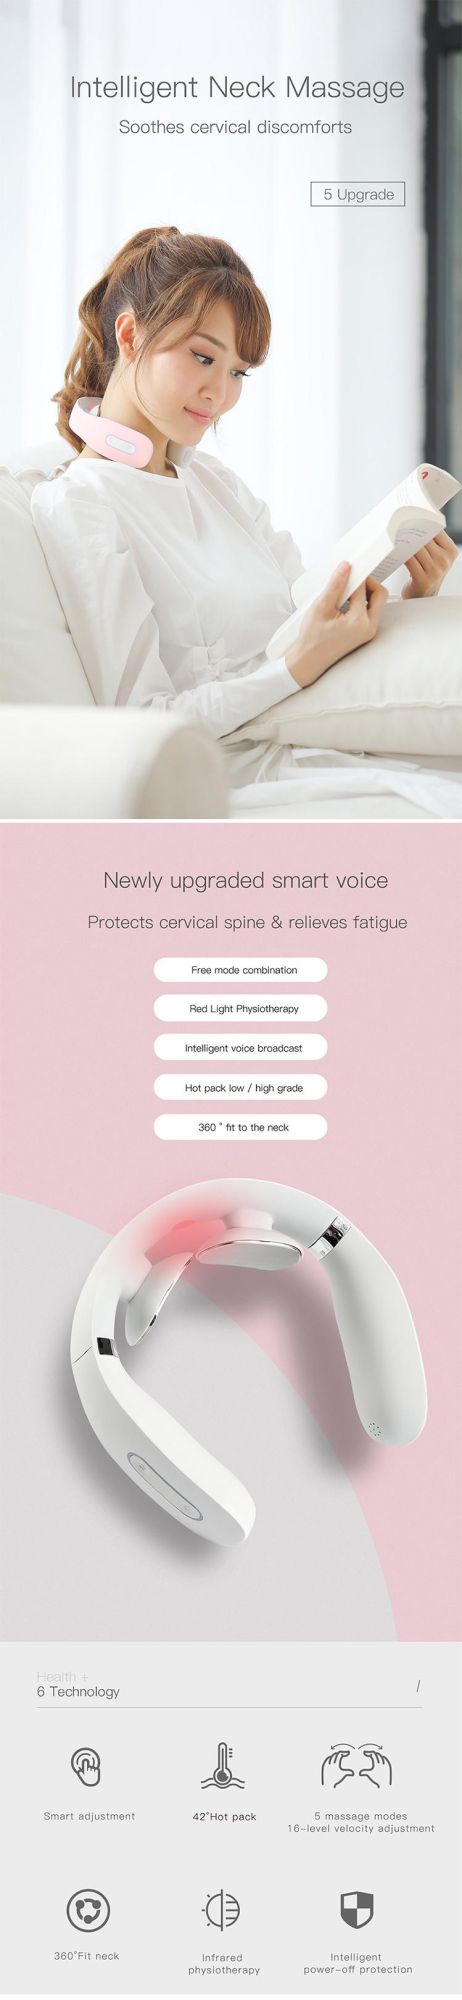 Popular Electric Vibration Neck Massager for Neck Pain Relief